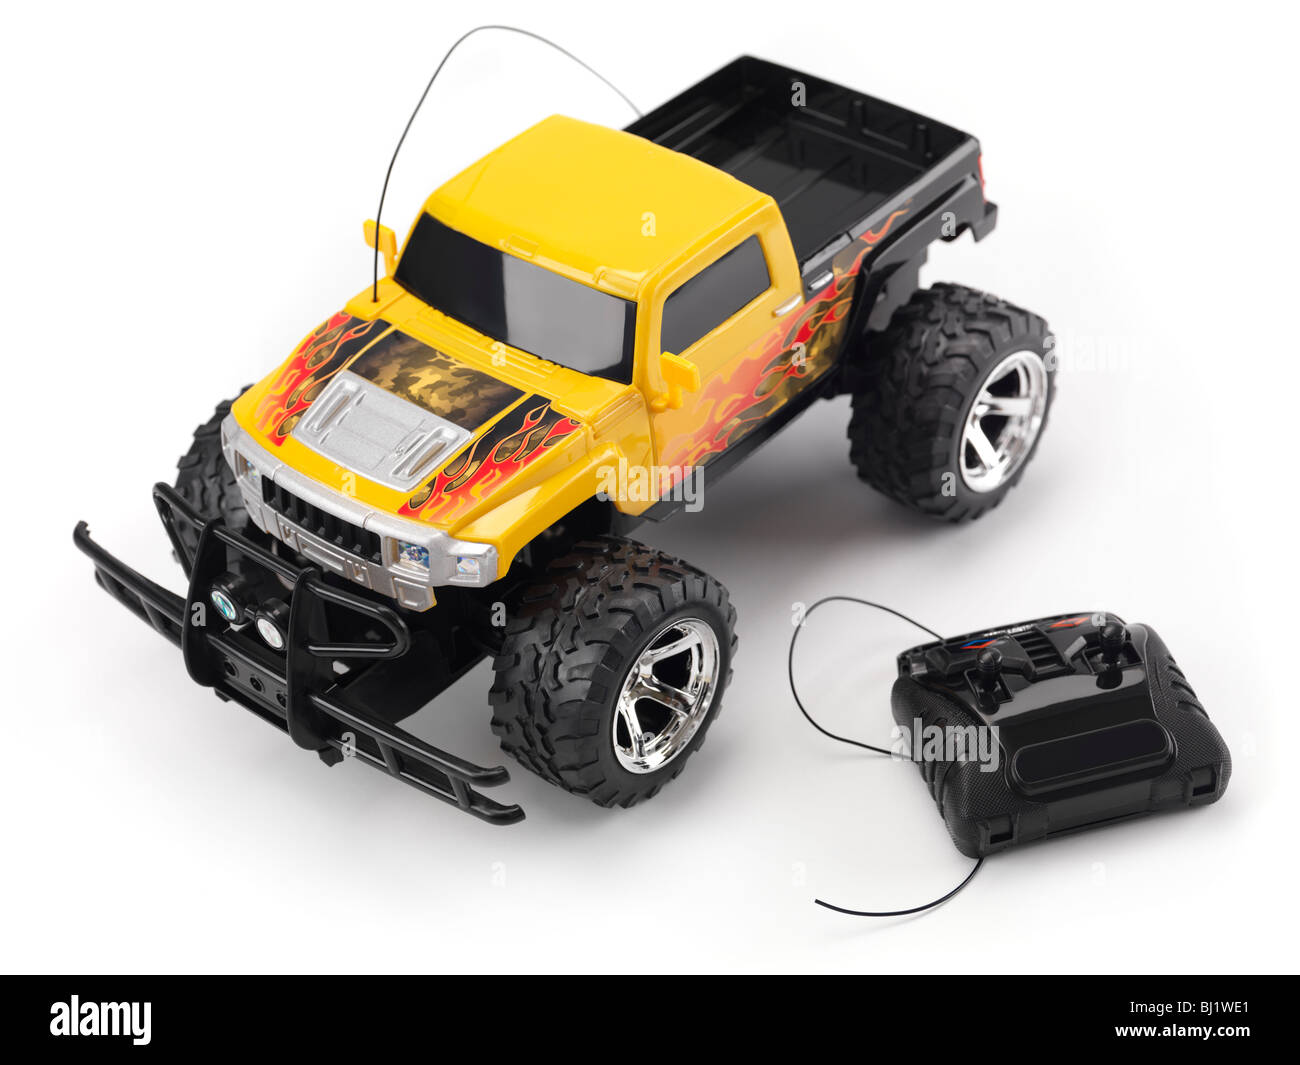 Radio remote controlled truck toy car. Isolated on white background. Stock Photo